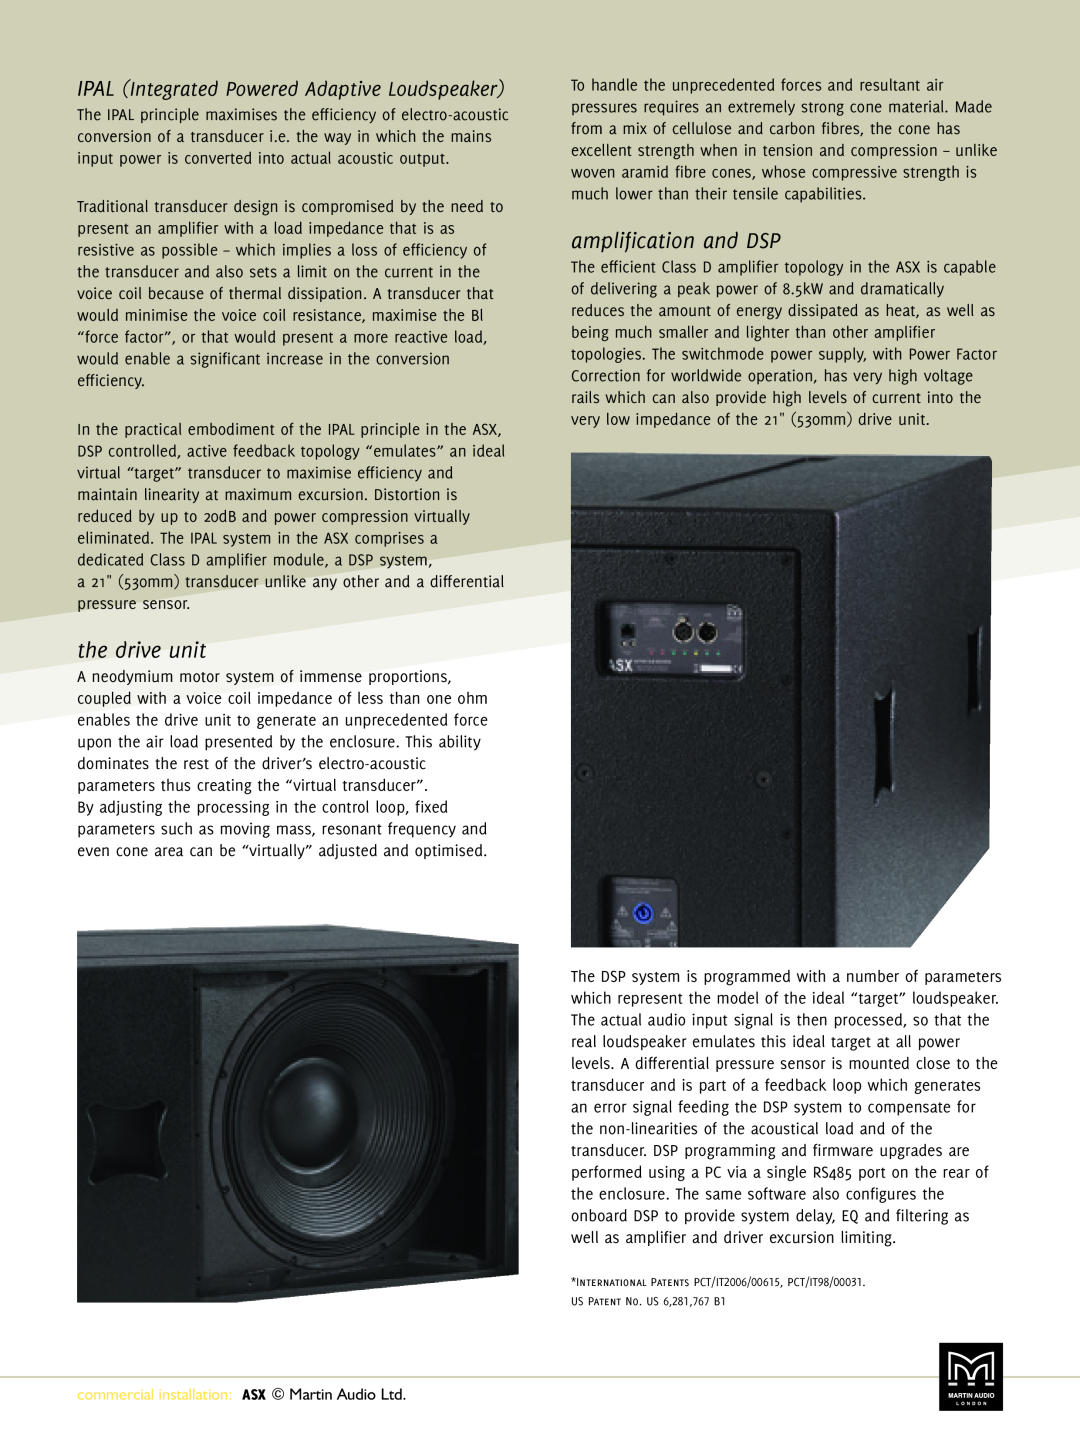 Martin Audio ASX manual the drive unit, amplification and DSP, IPAL Integrated Powered Adaptive Loudspeaker 